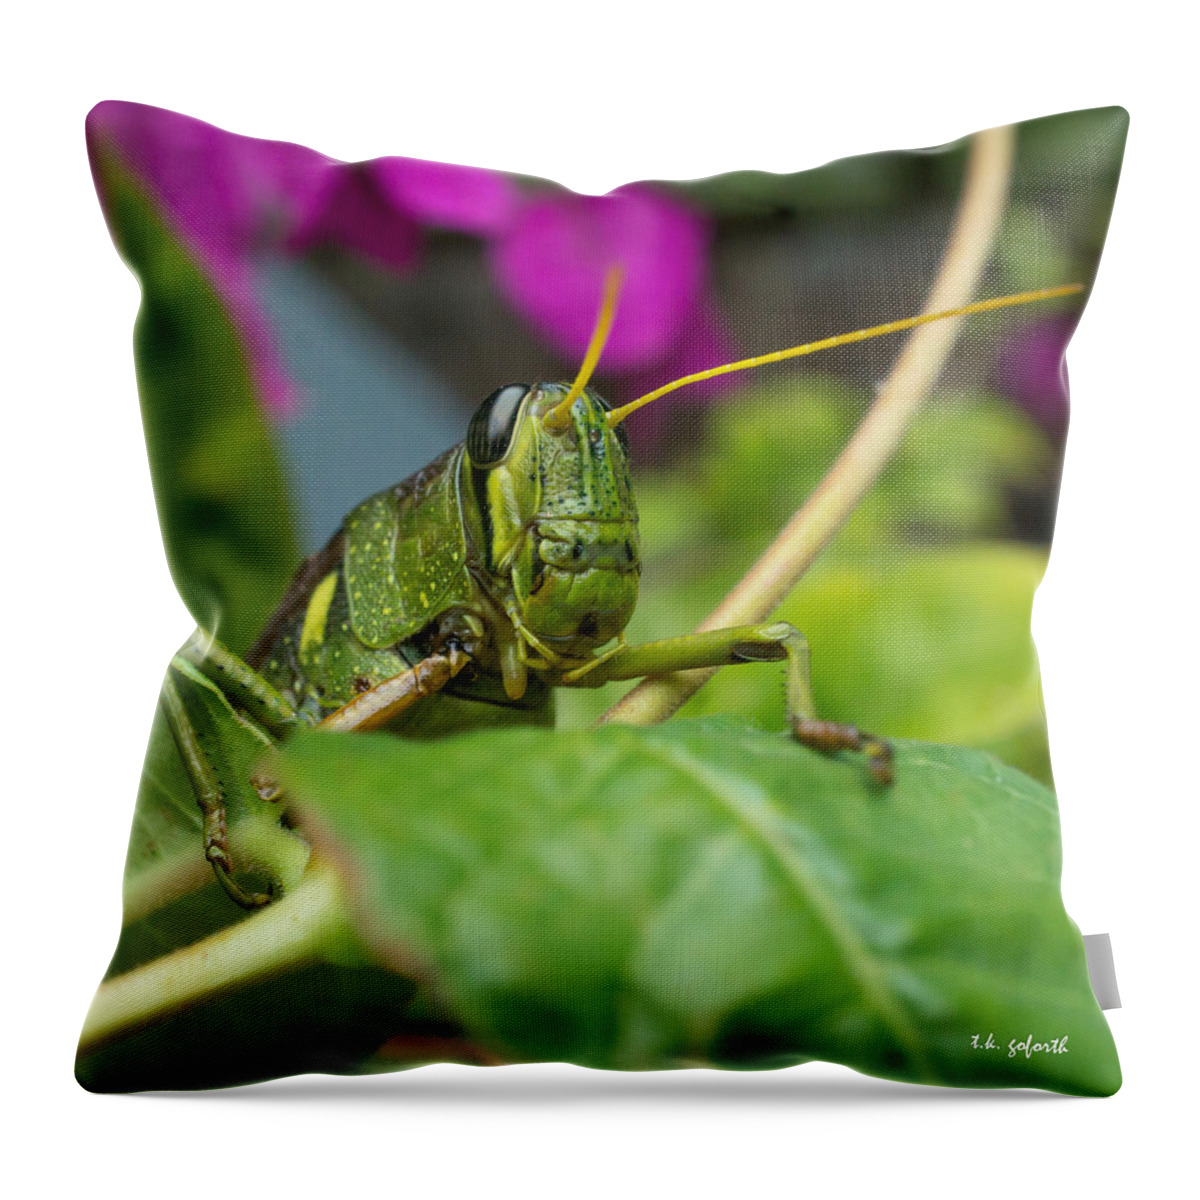 Lubber Grasshopper Throw Pillow featuring the photograph Who's There Squared by TK Goforth